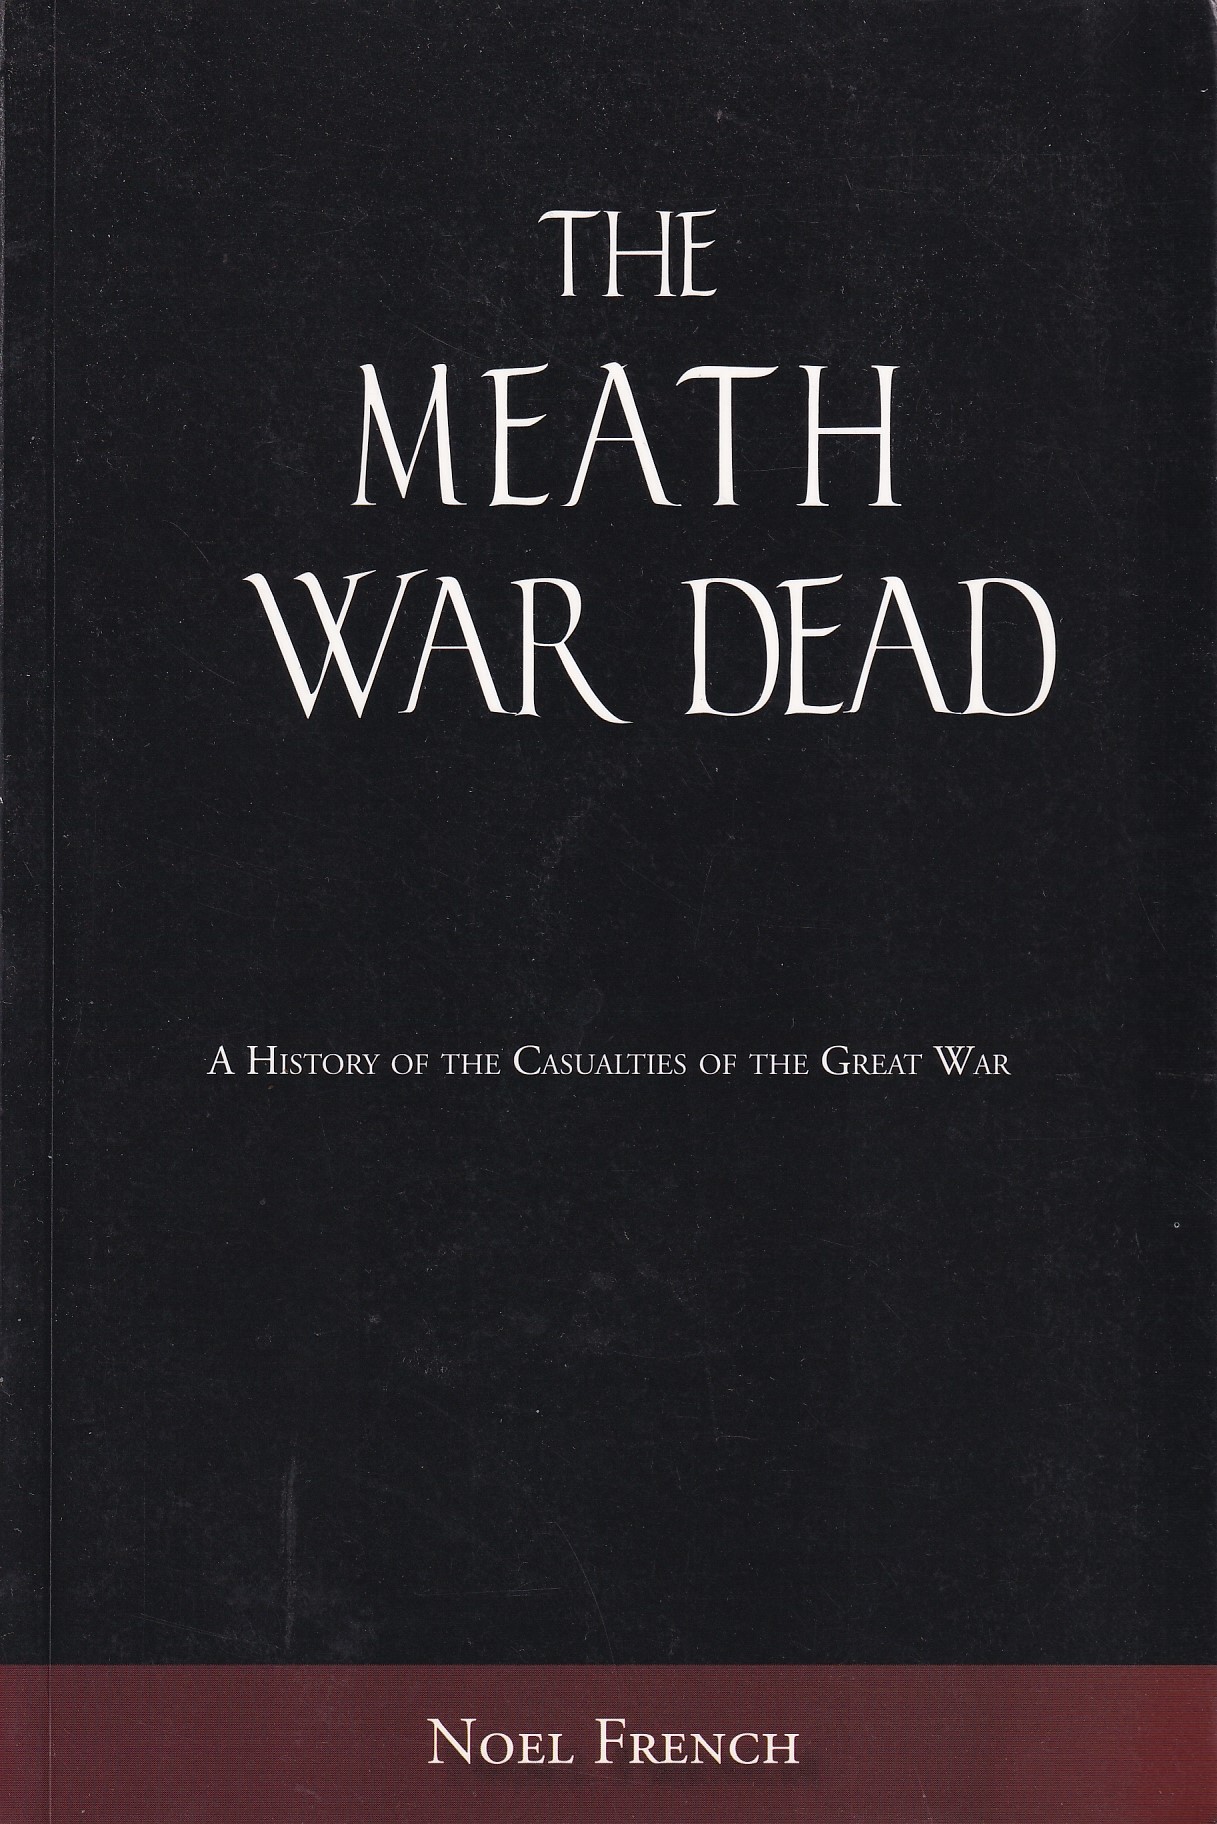 The Meath War Dead: A History of the Casualties of the Great War by Noel French